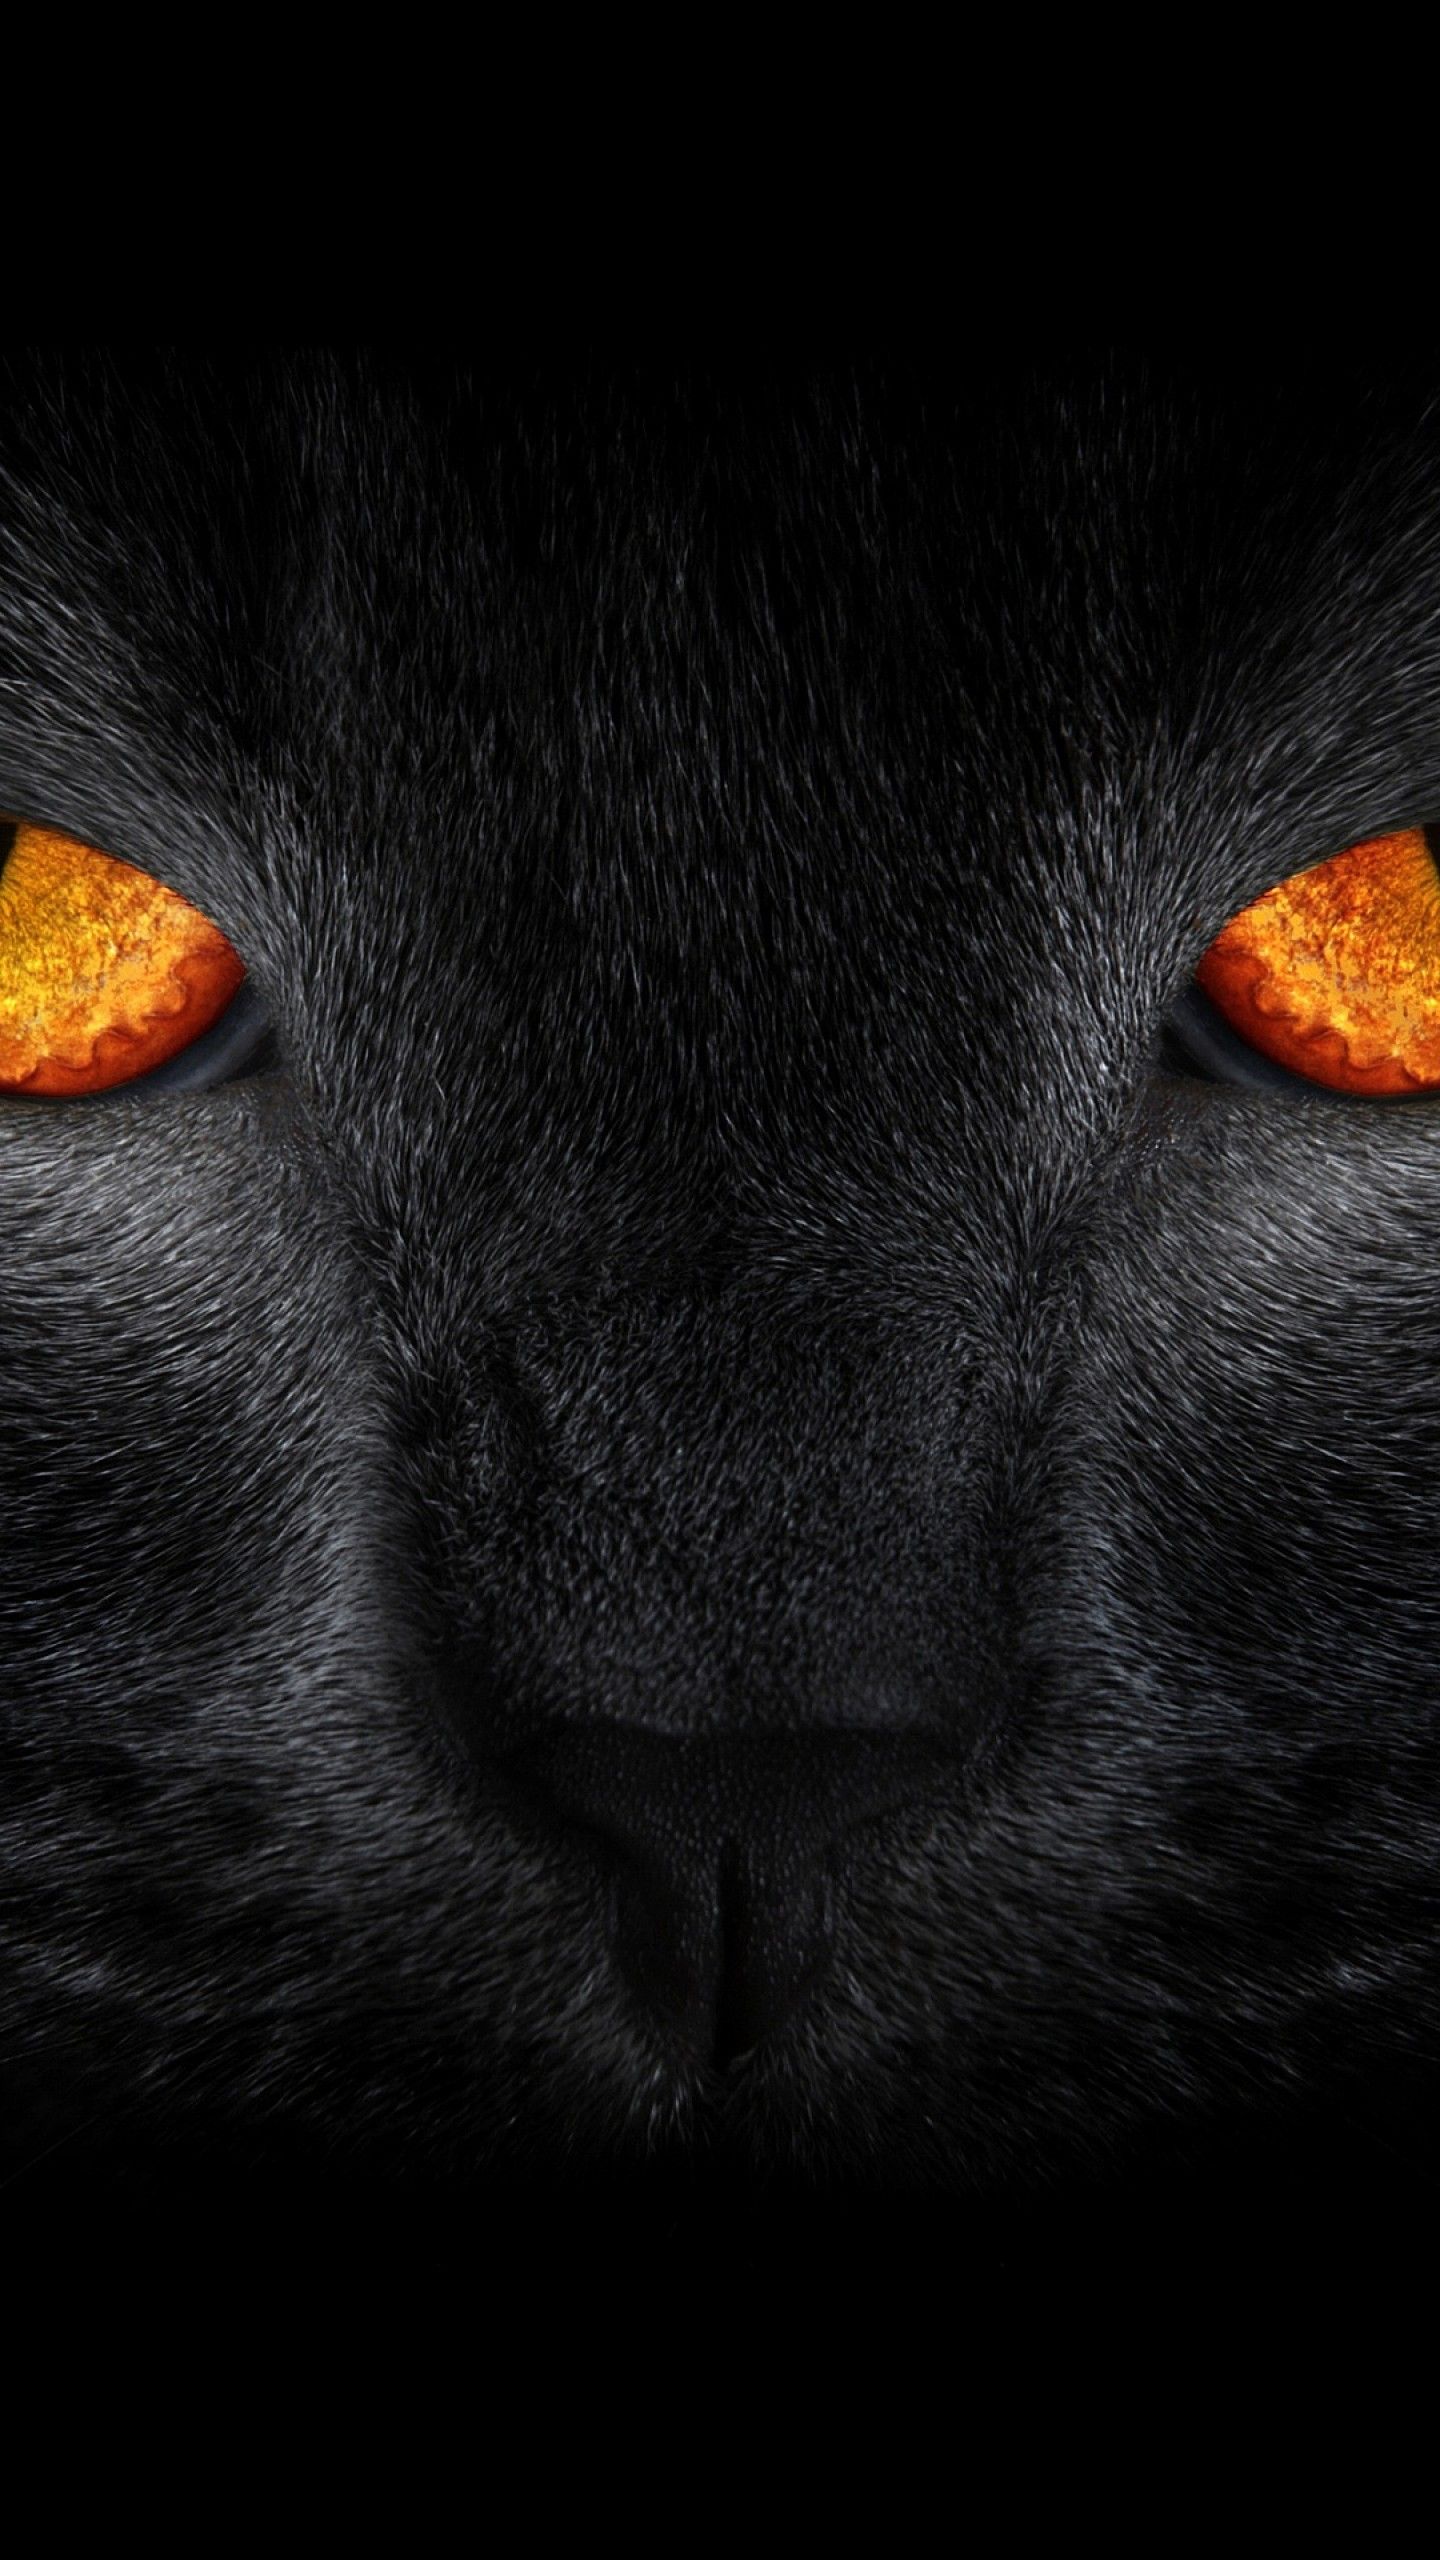 Wallpaper Black Cat, Scary, Yellow eyes, Dark background, Animals,. Wallpaper for iPhone, Android, Mobile and Desktop